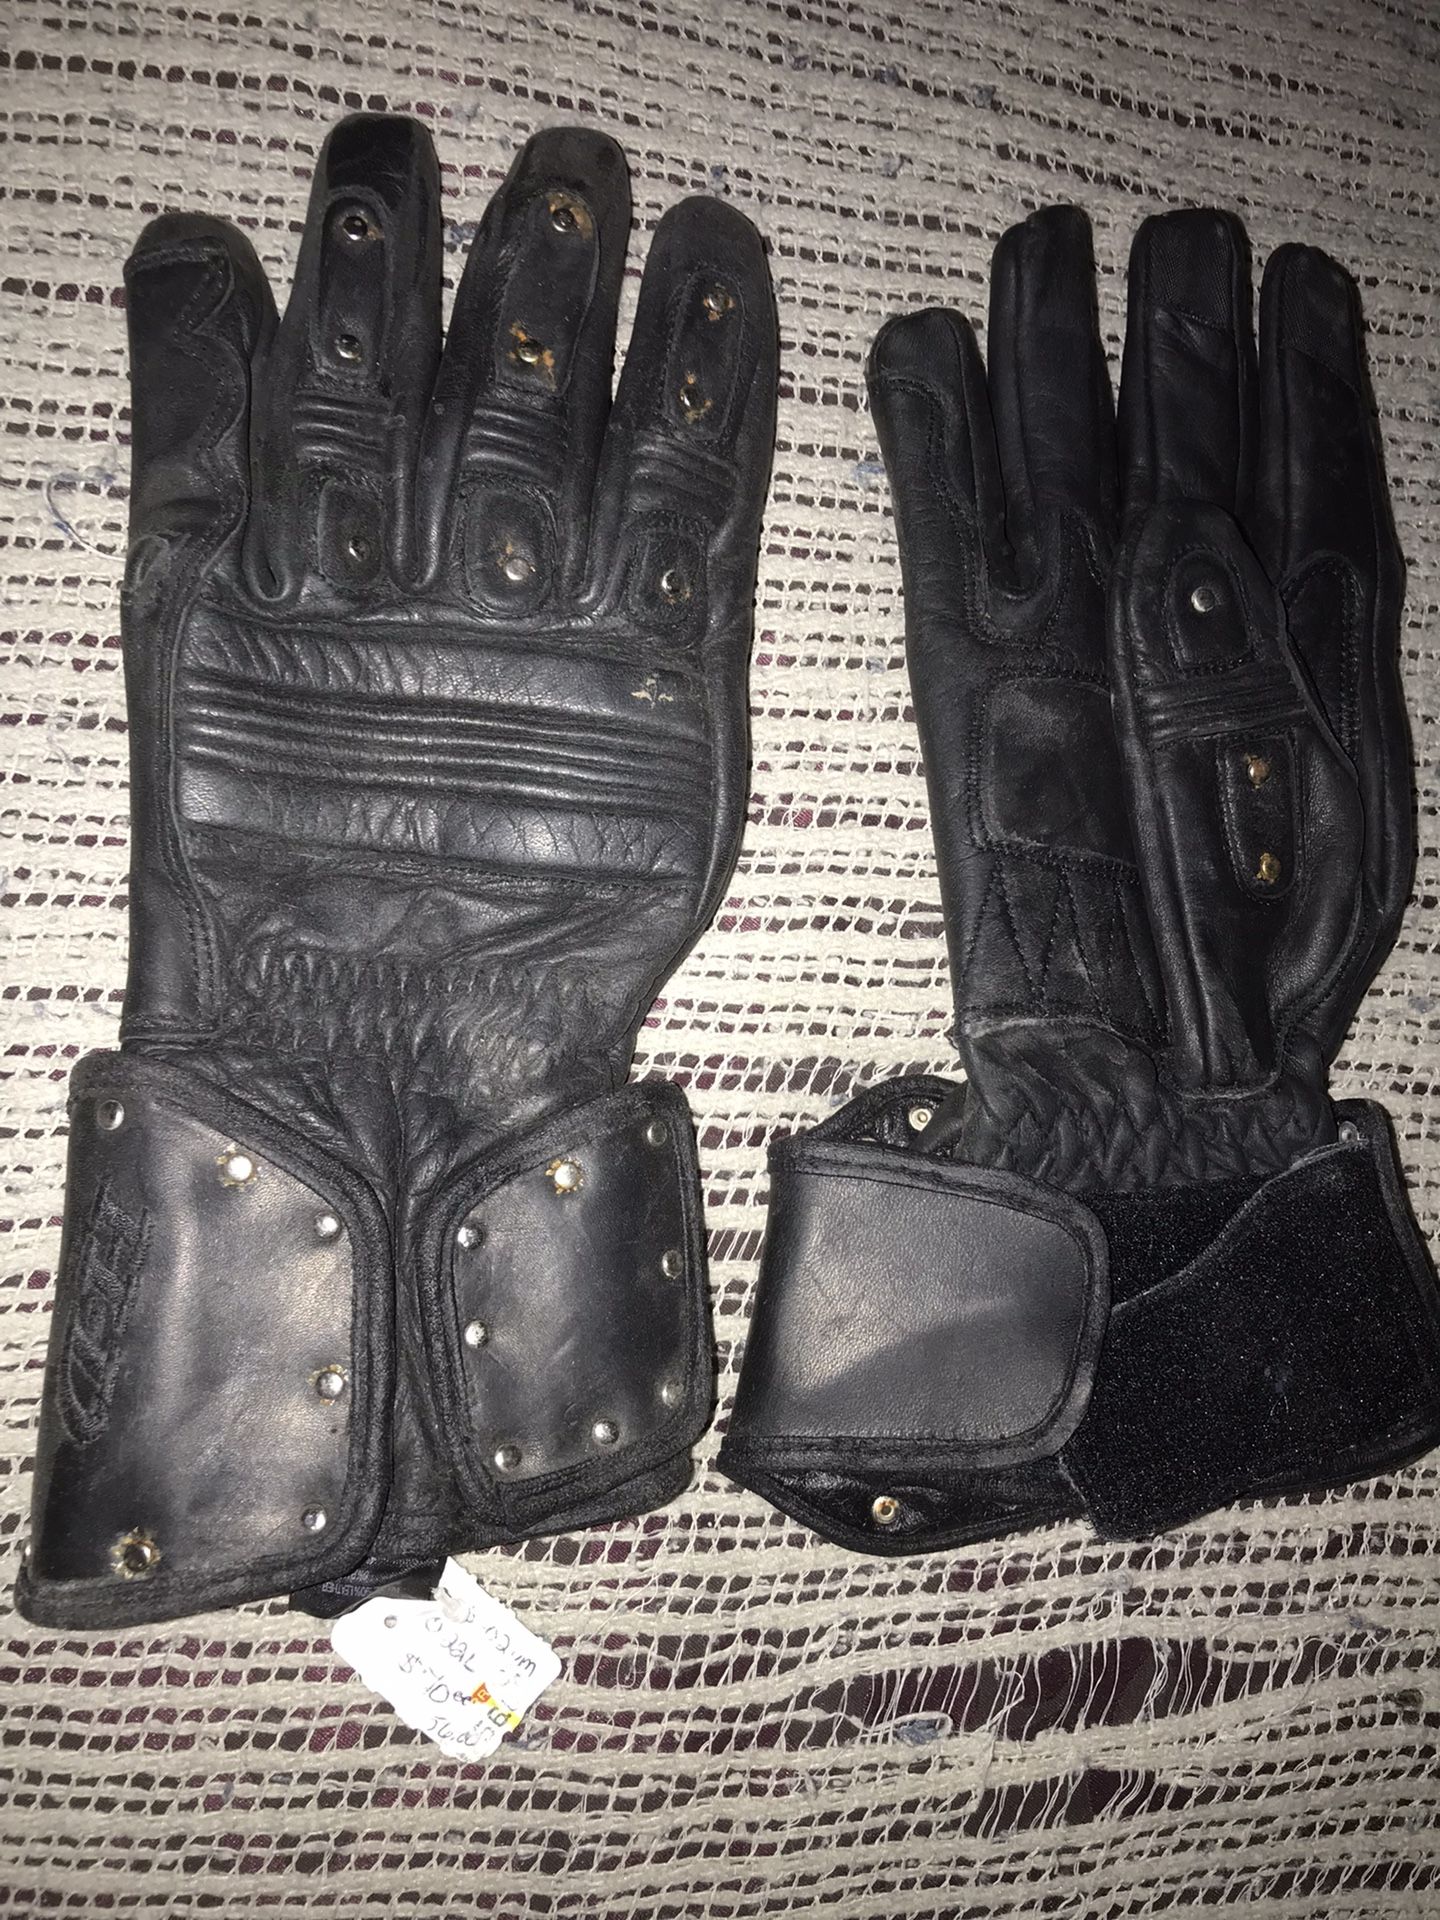 New Heavy Leather Harley Davidson Large Gloves Only $50 Firm